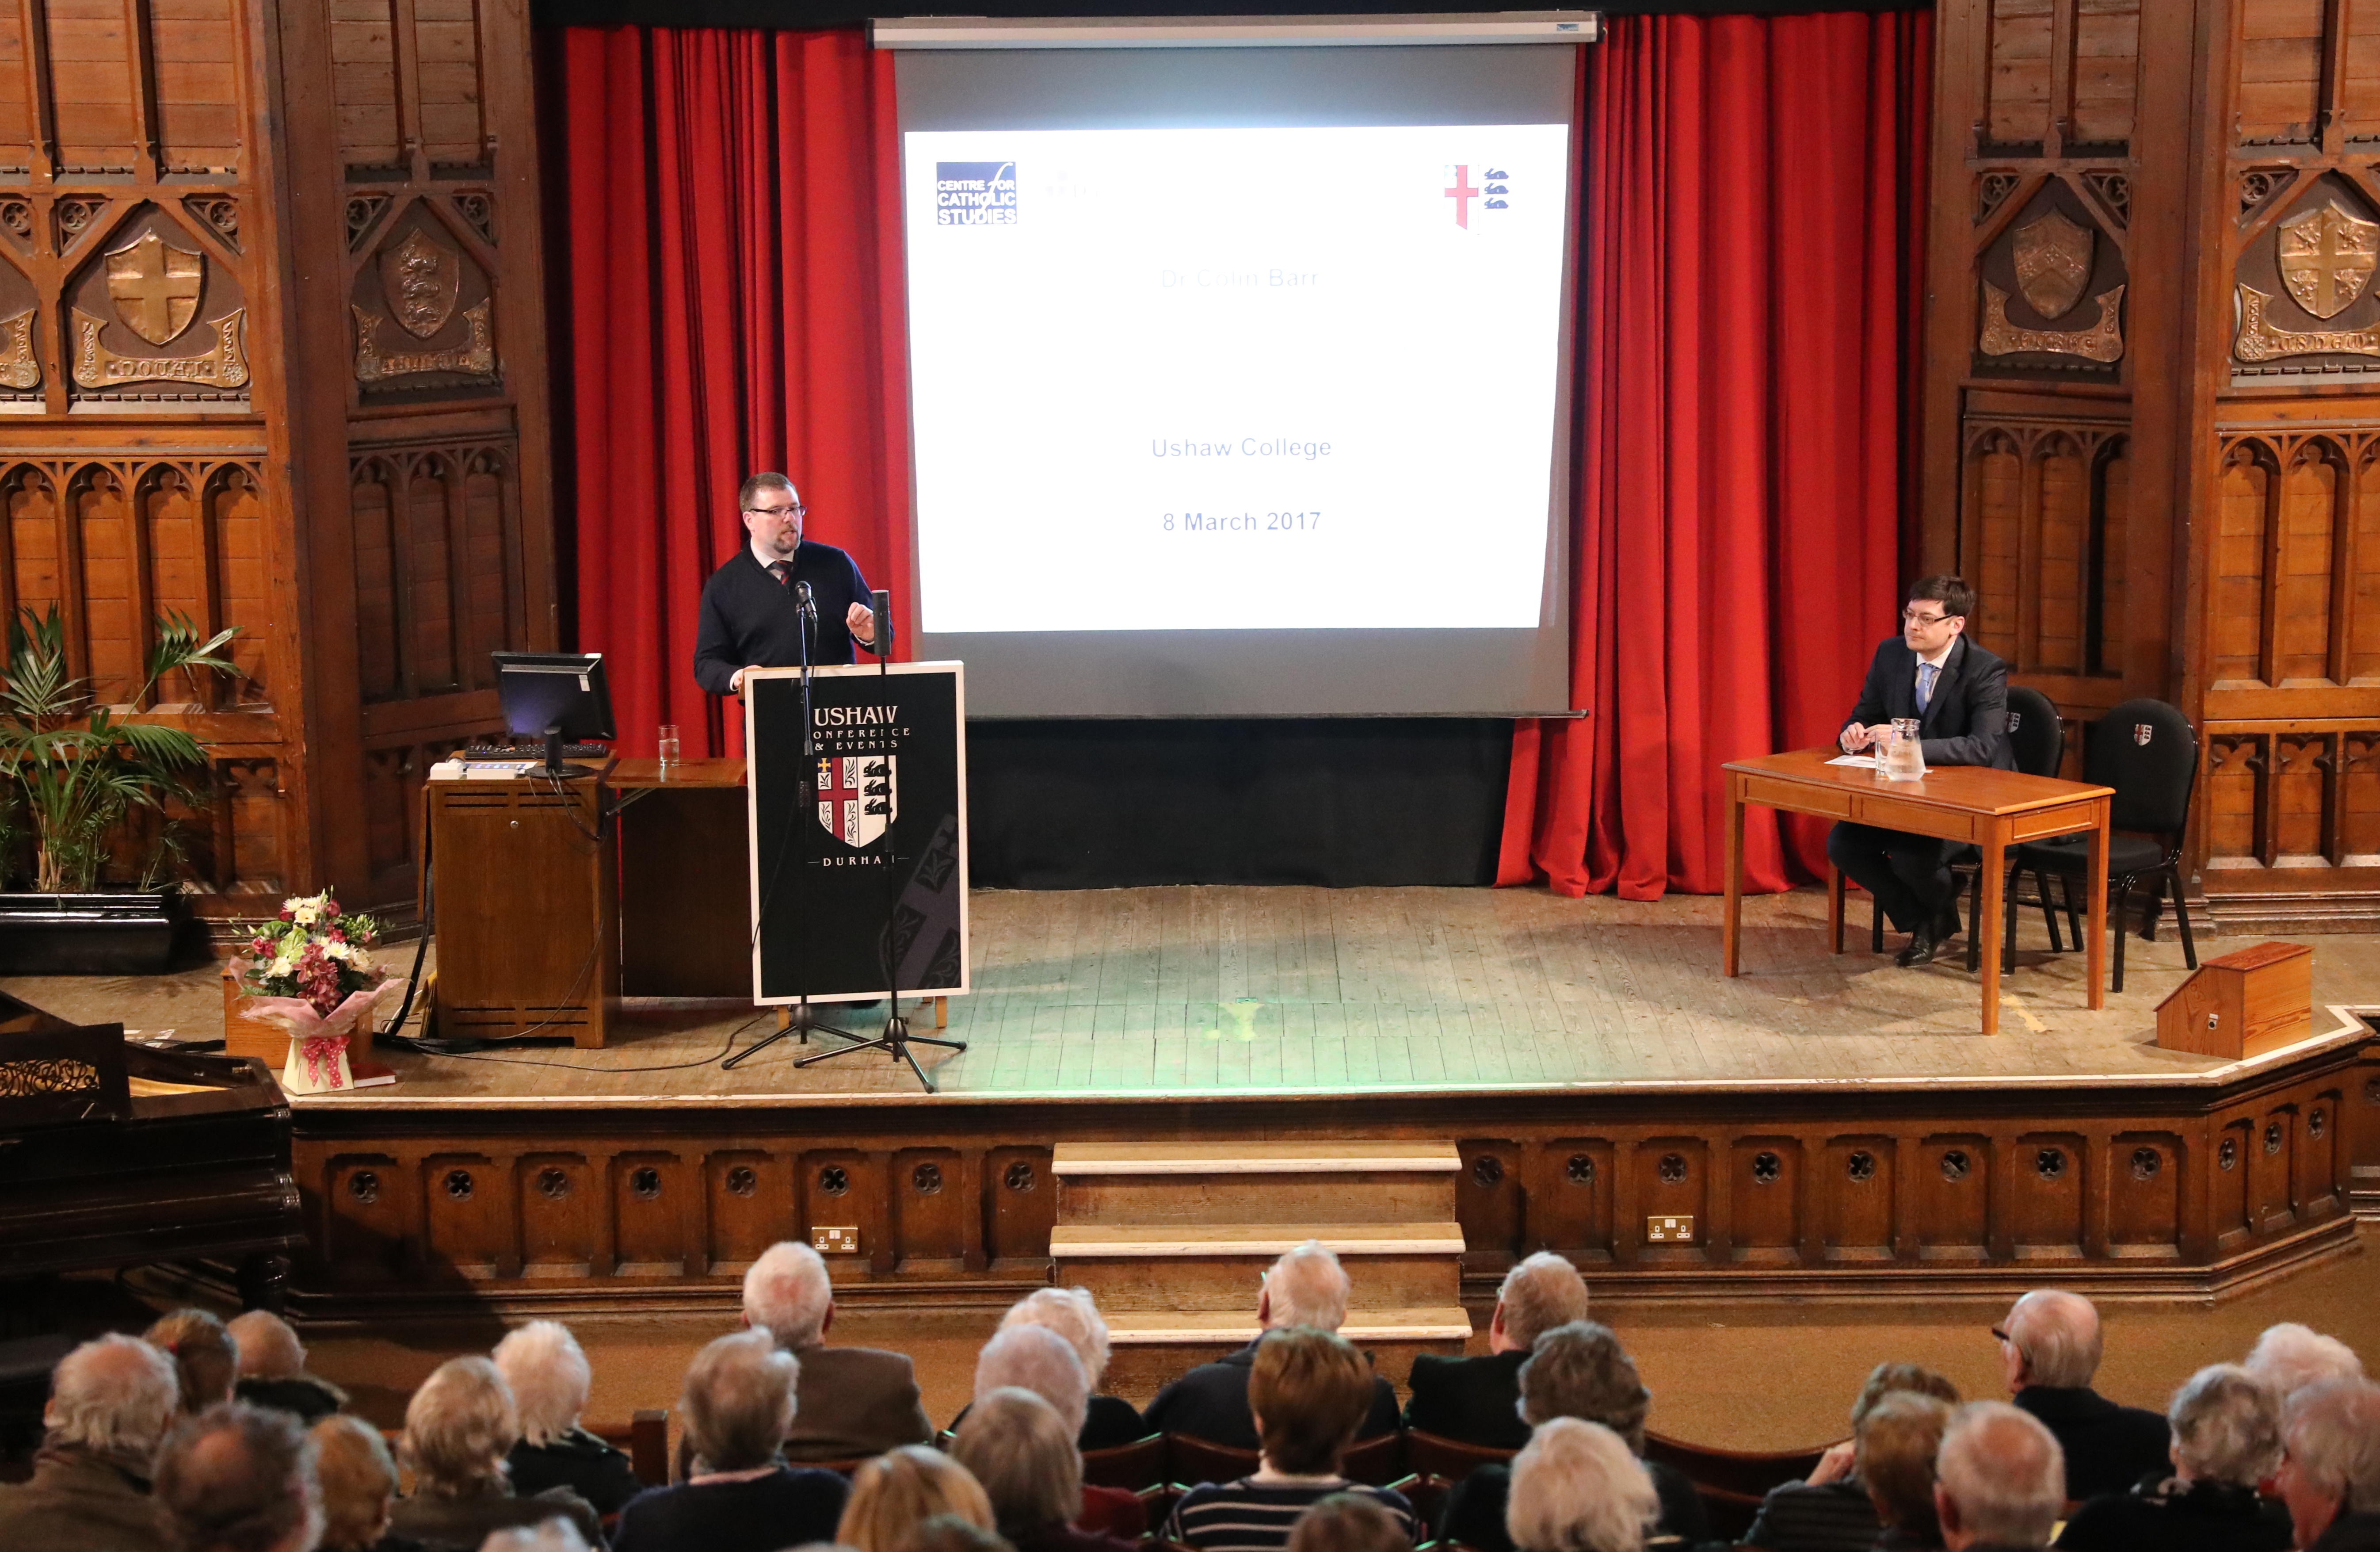 A lecture taking place in Ushaw College